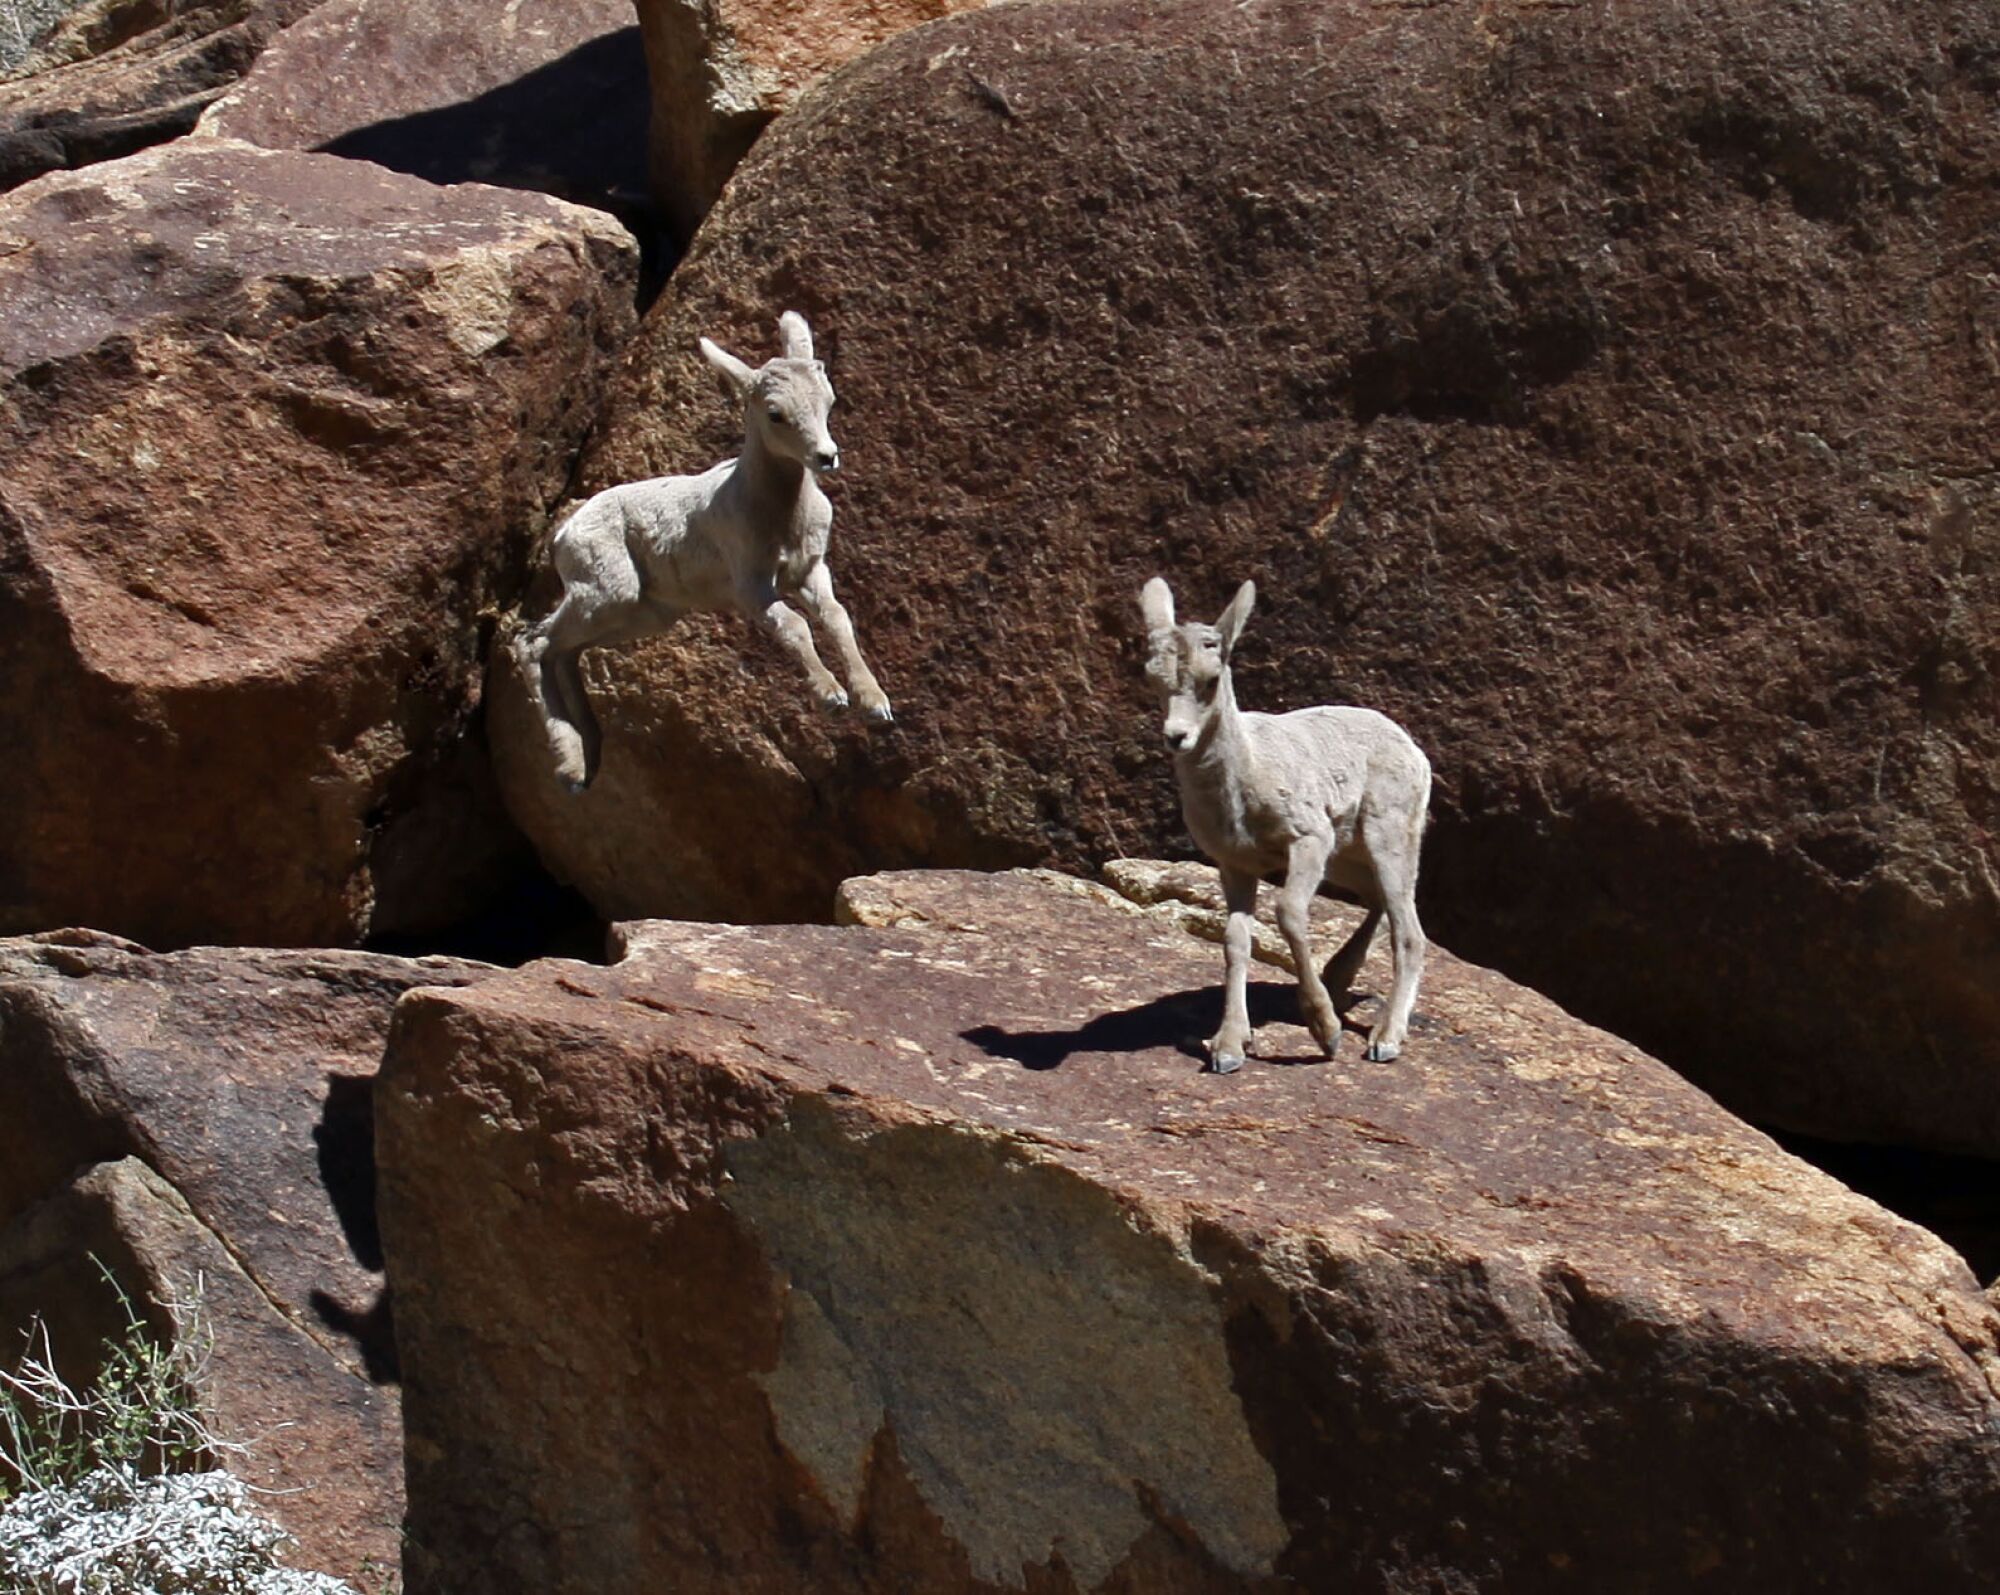 A young bighorn sheep springs onto a rock to join a second.